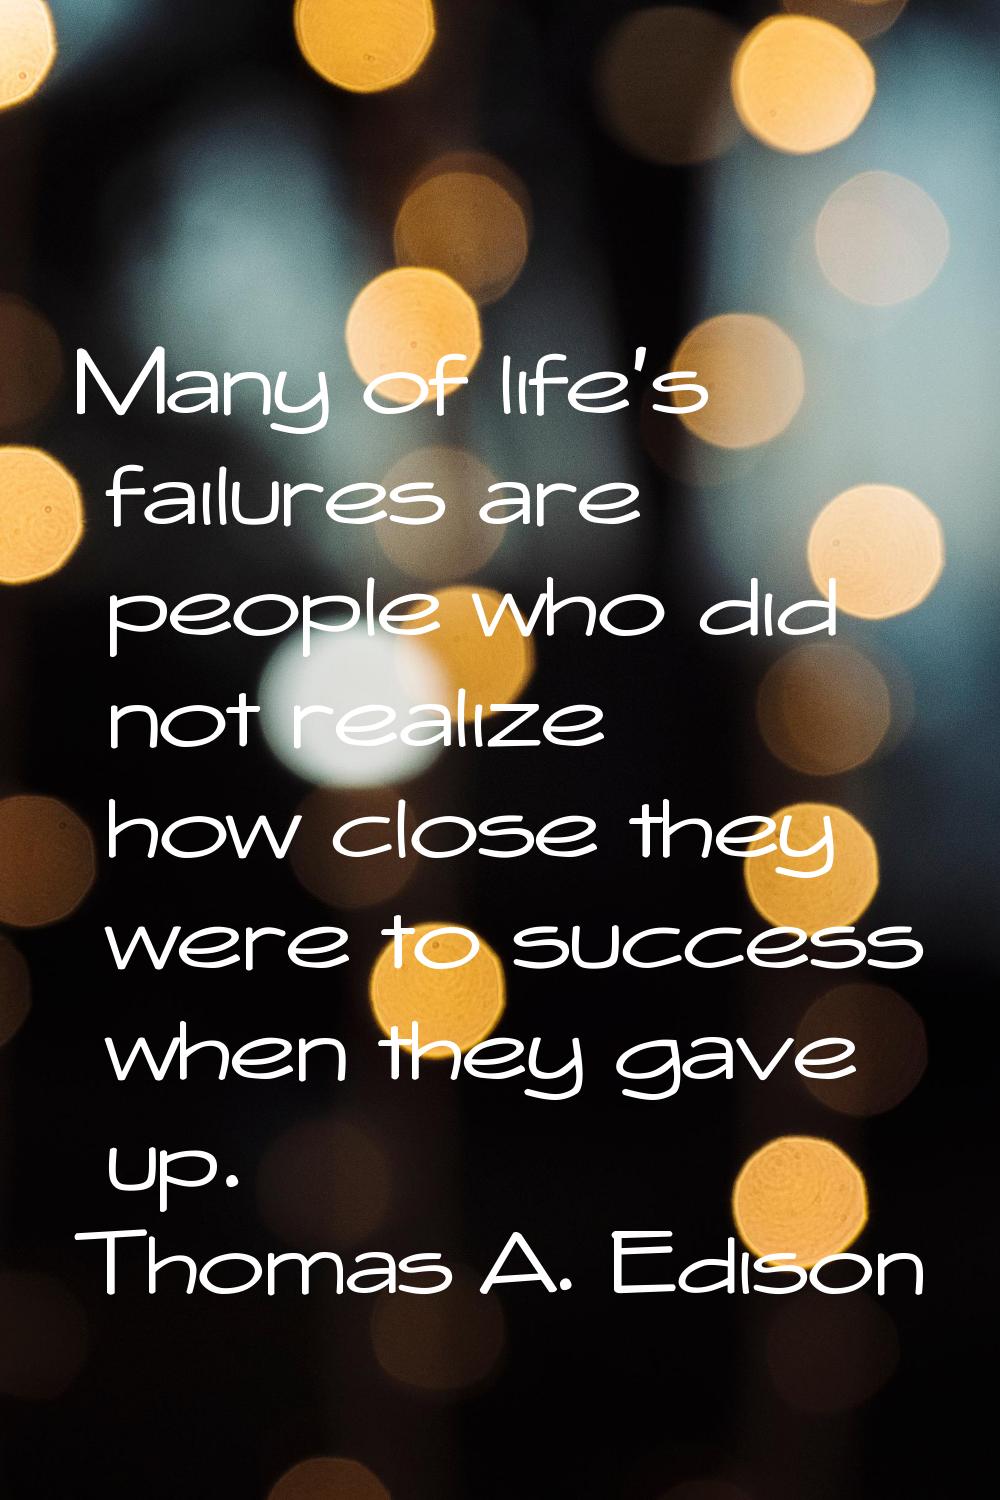 Many of life's failures are people who did not realize how close they were to success when they gav